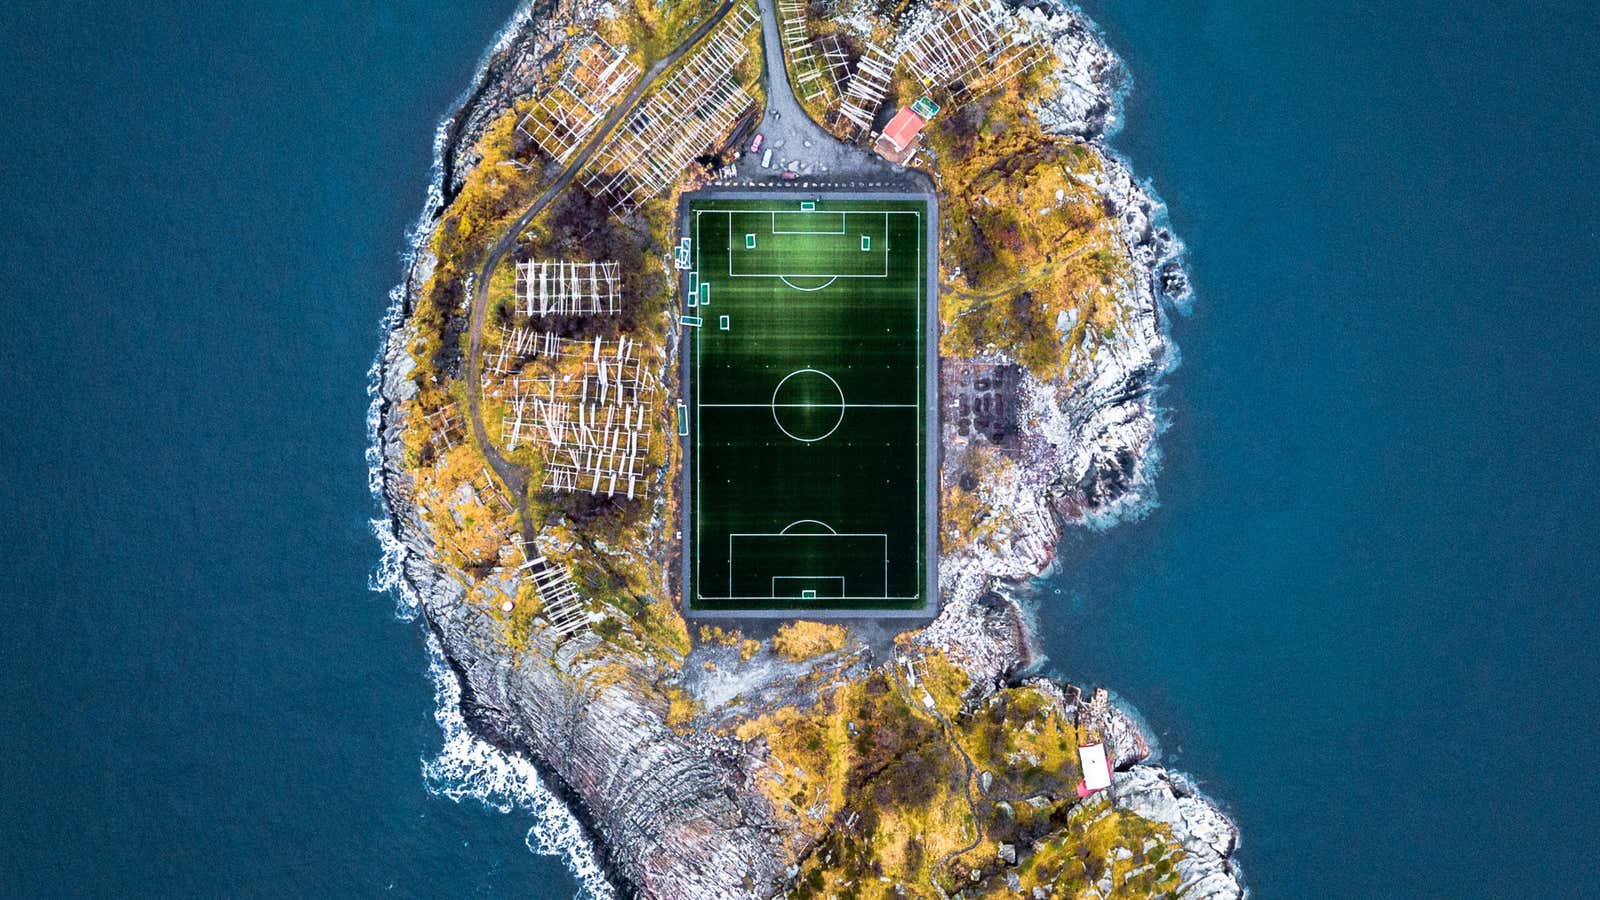 These award-winning drone photos contrast nature and humanity